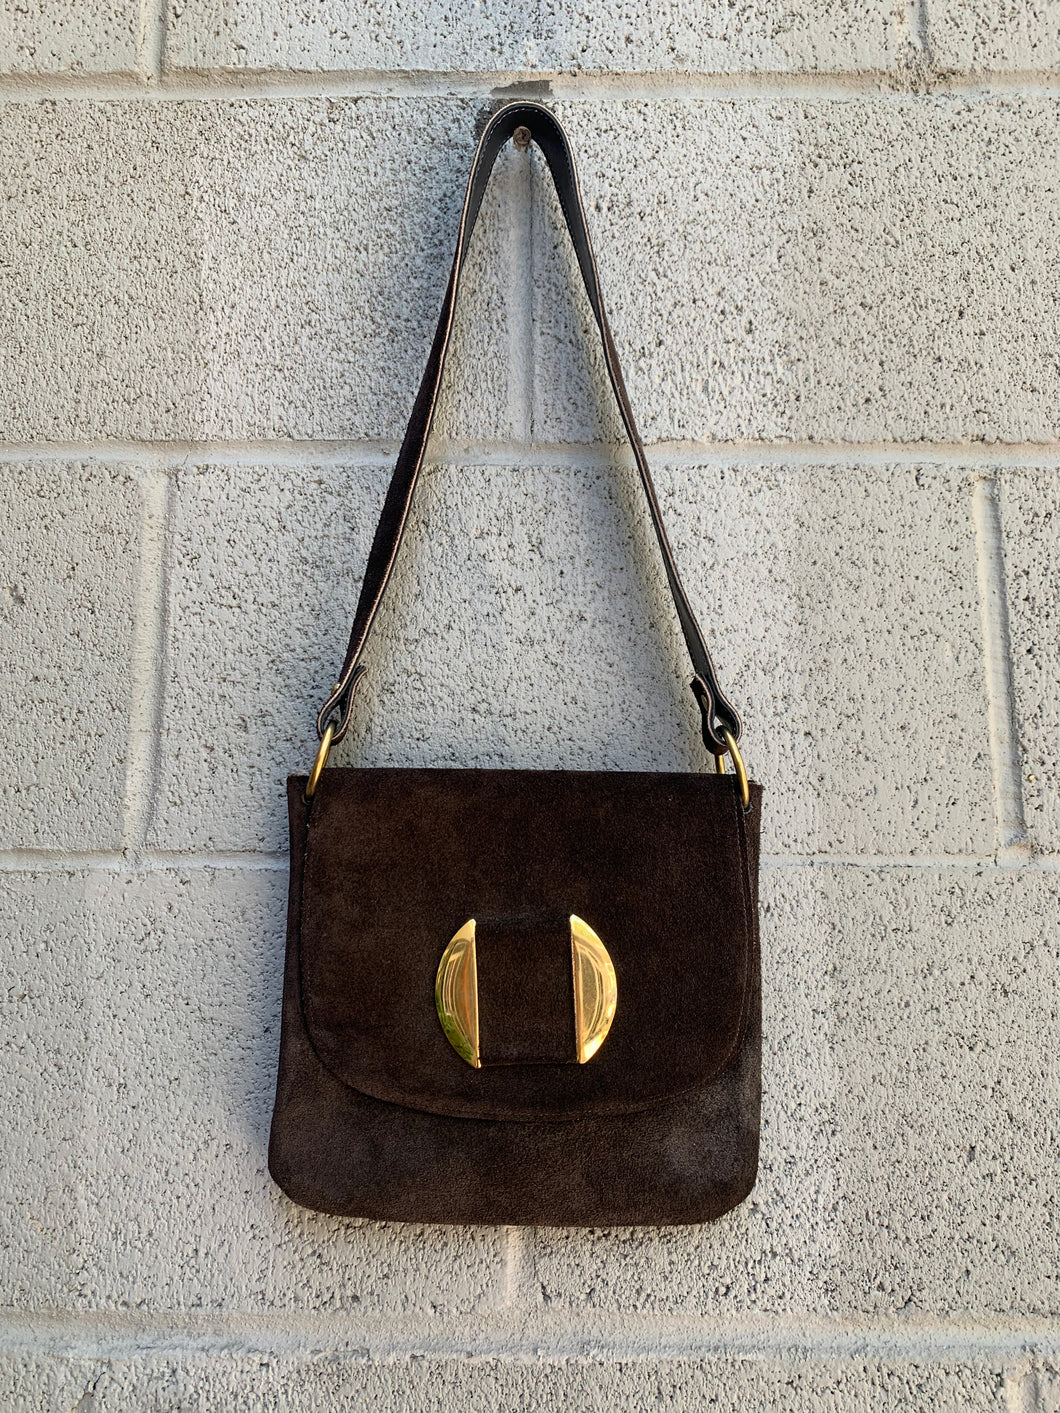 1970’s brown suede leather purse